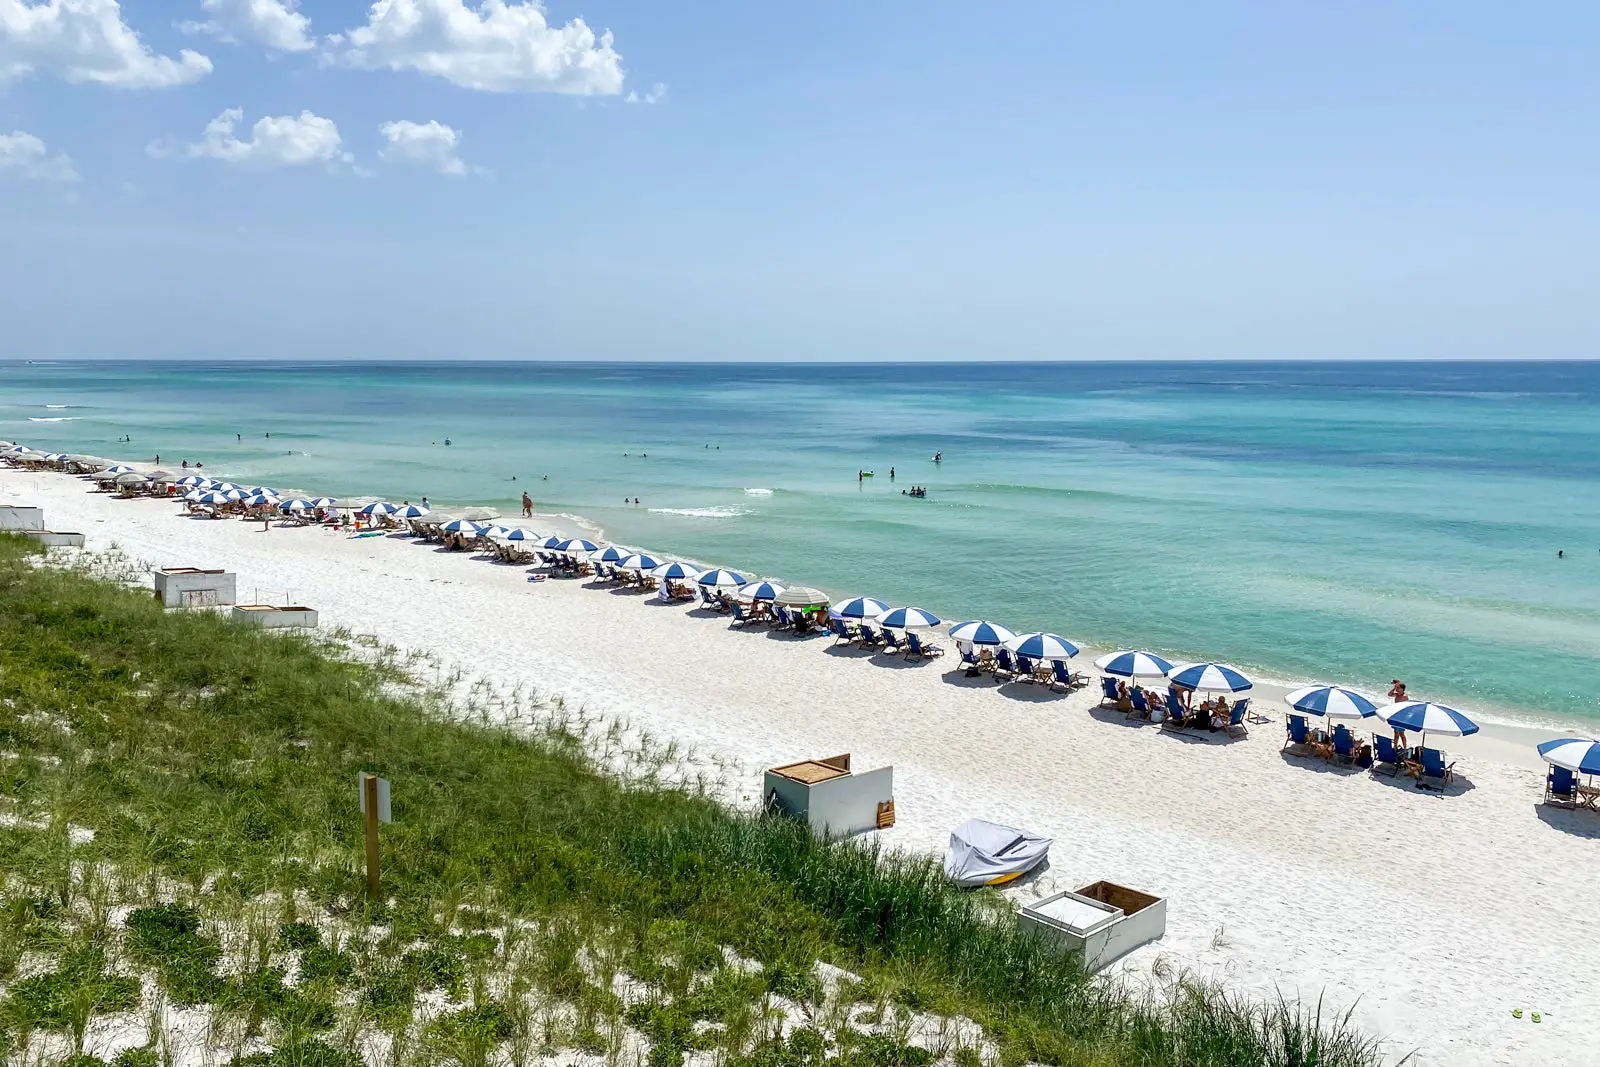 Florida’s 30A Beaches: One of the Best-Kept Beach Secrets in the US